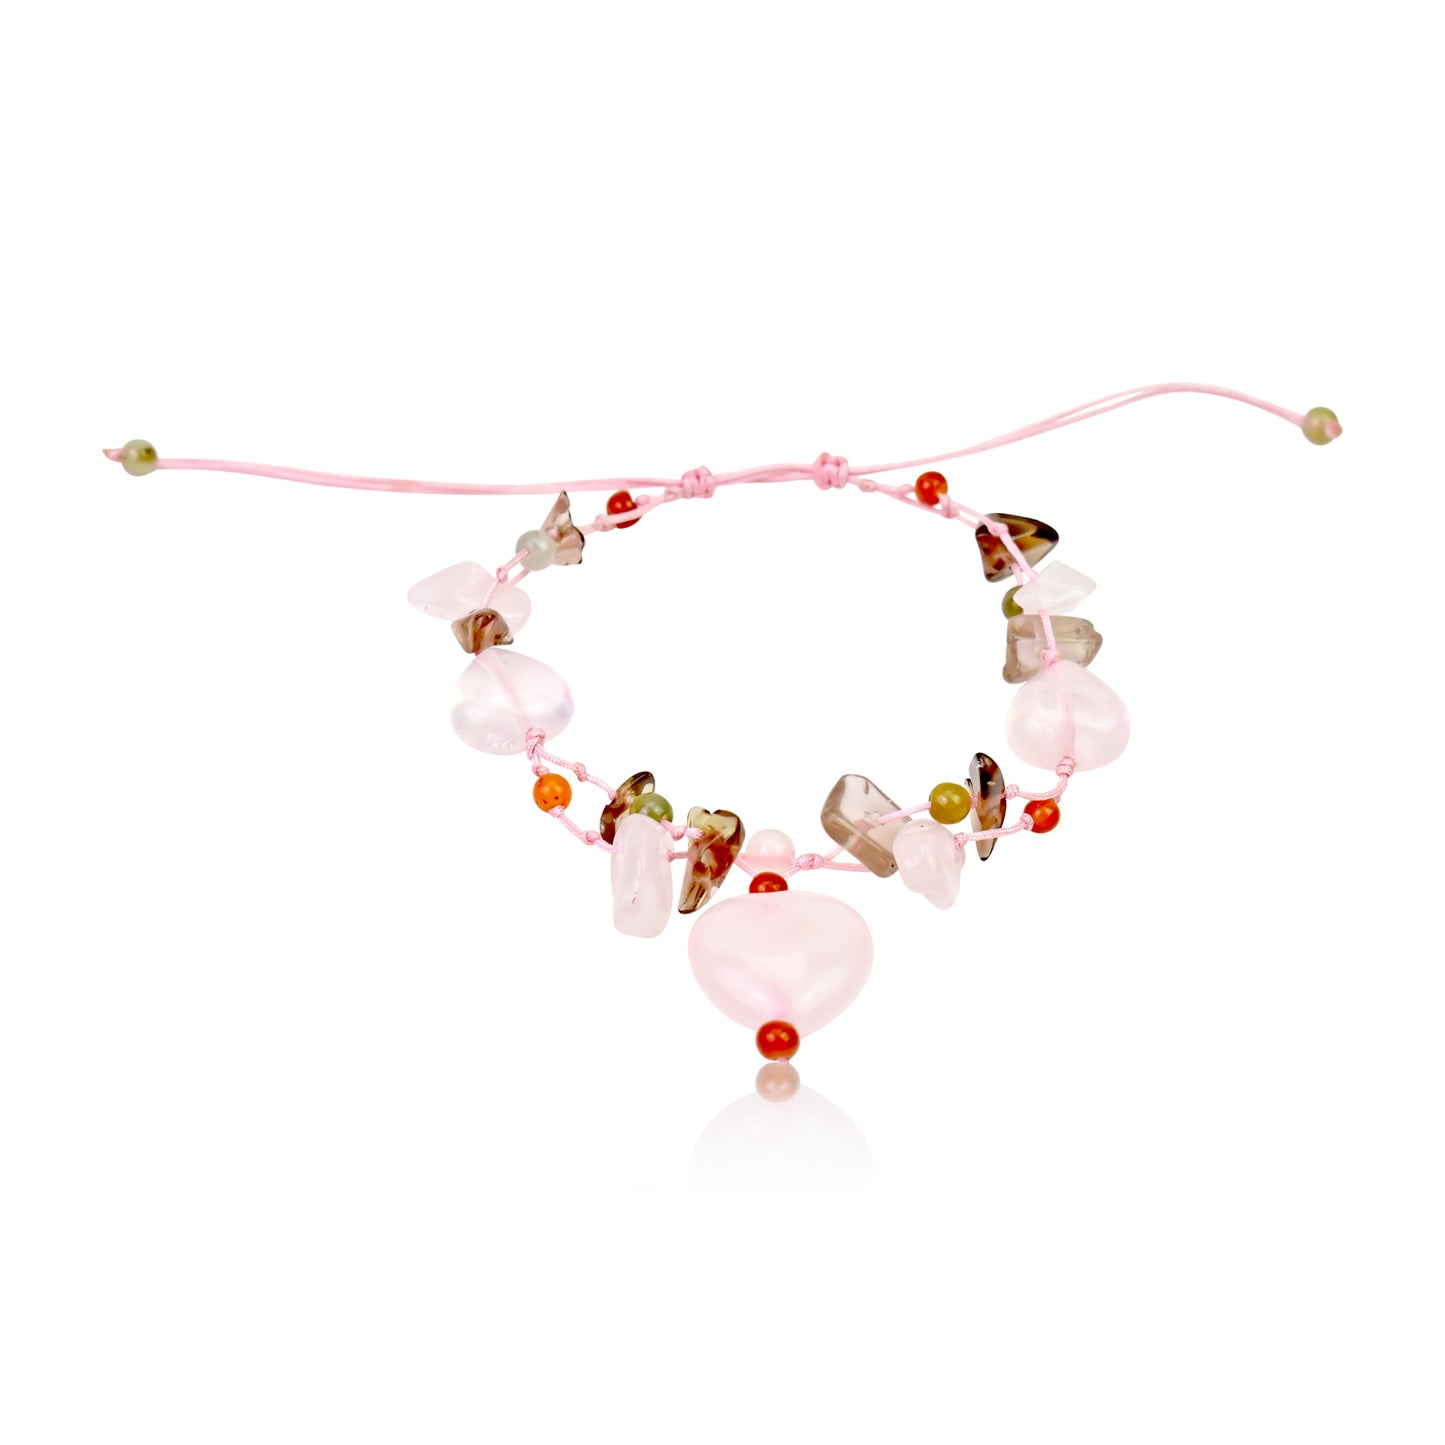 Pull a Spell on Everyone with the Feminine Hearts Gemstones Bracelet